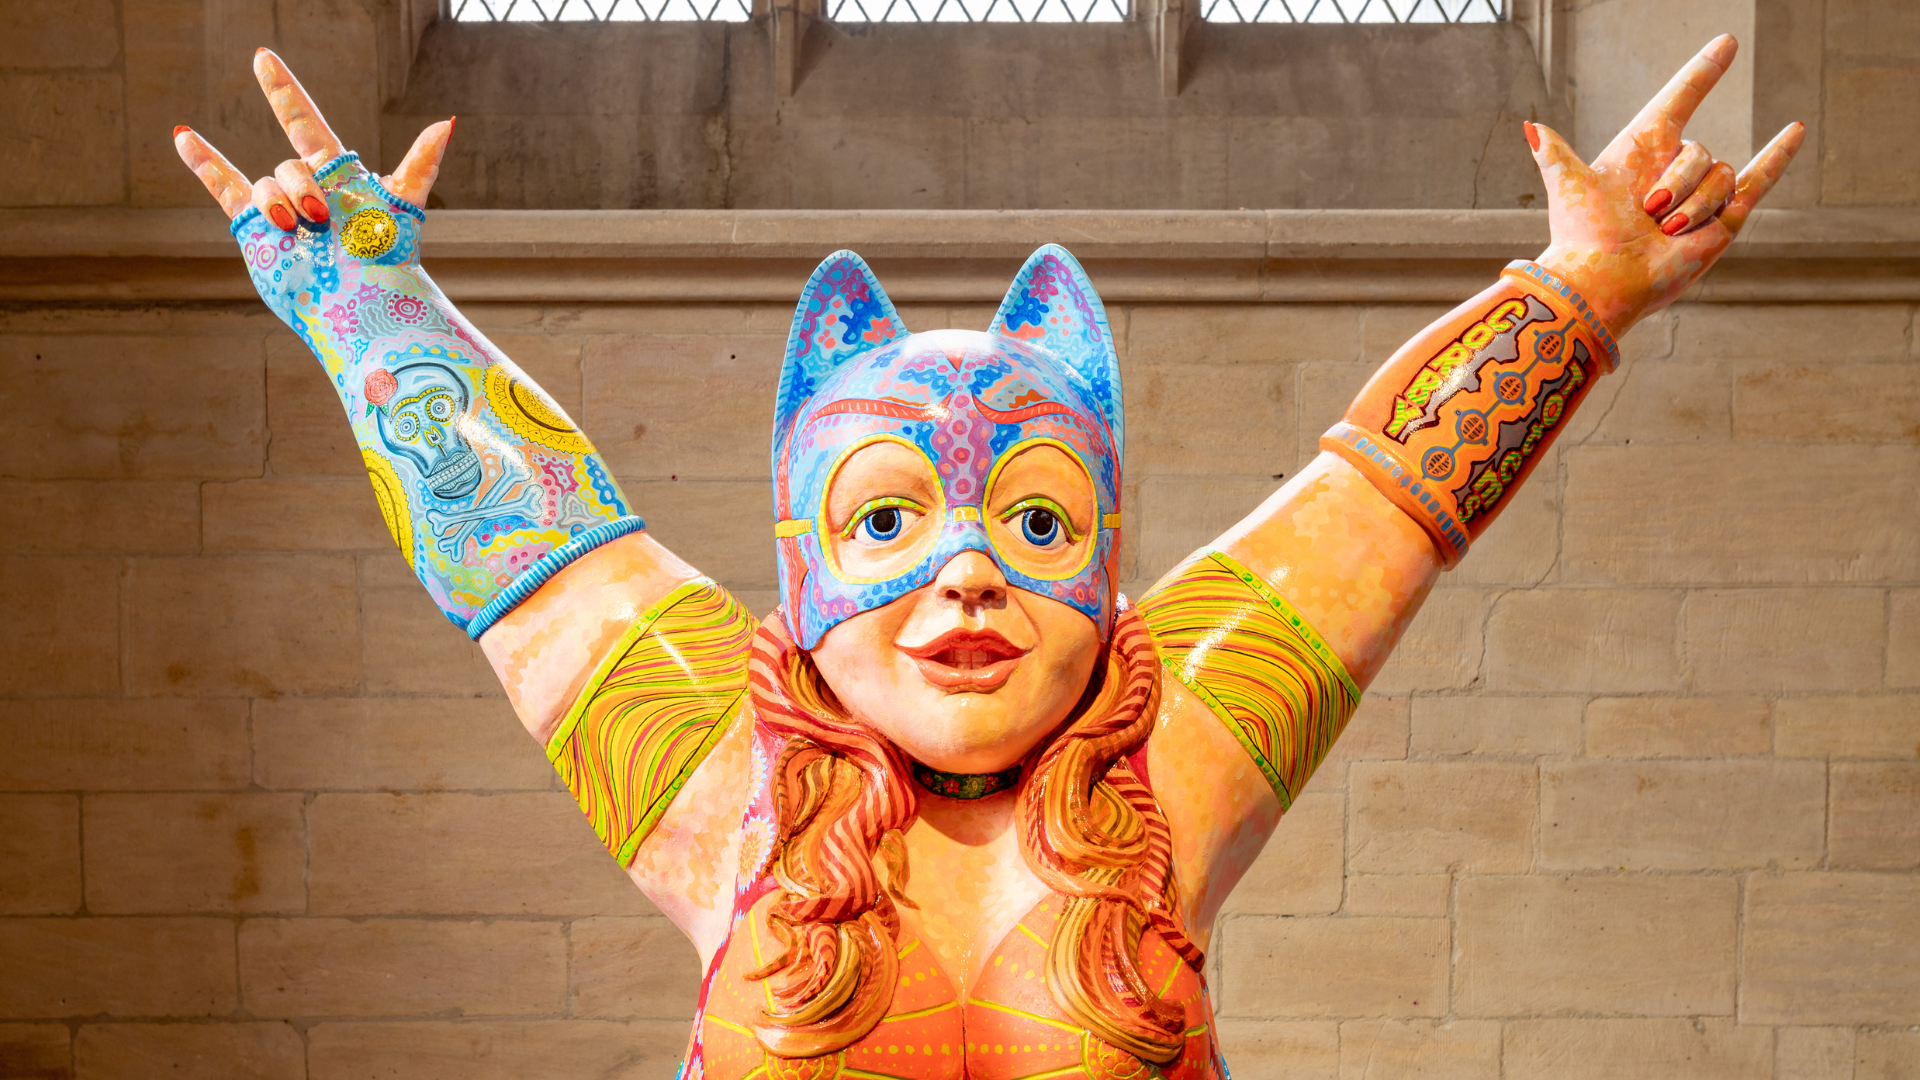 A psychedelic woman wearing a mask with ears putting her hands in the air, wearing decorative gloves, arm bands and top